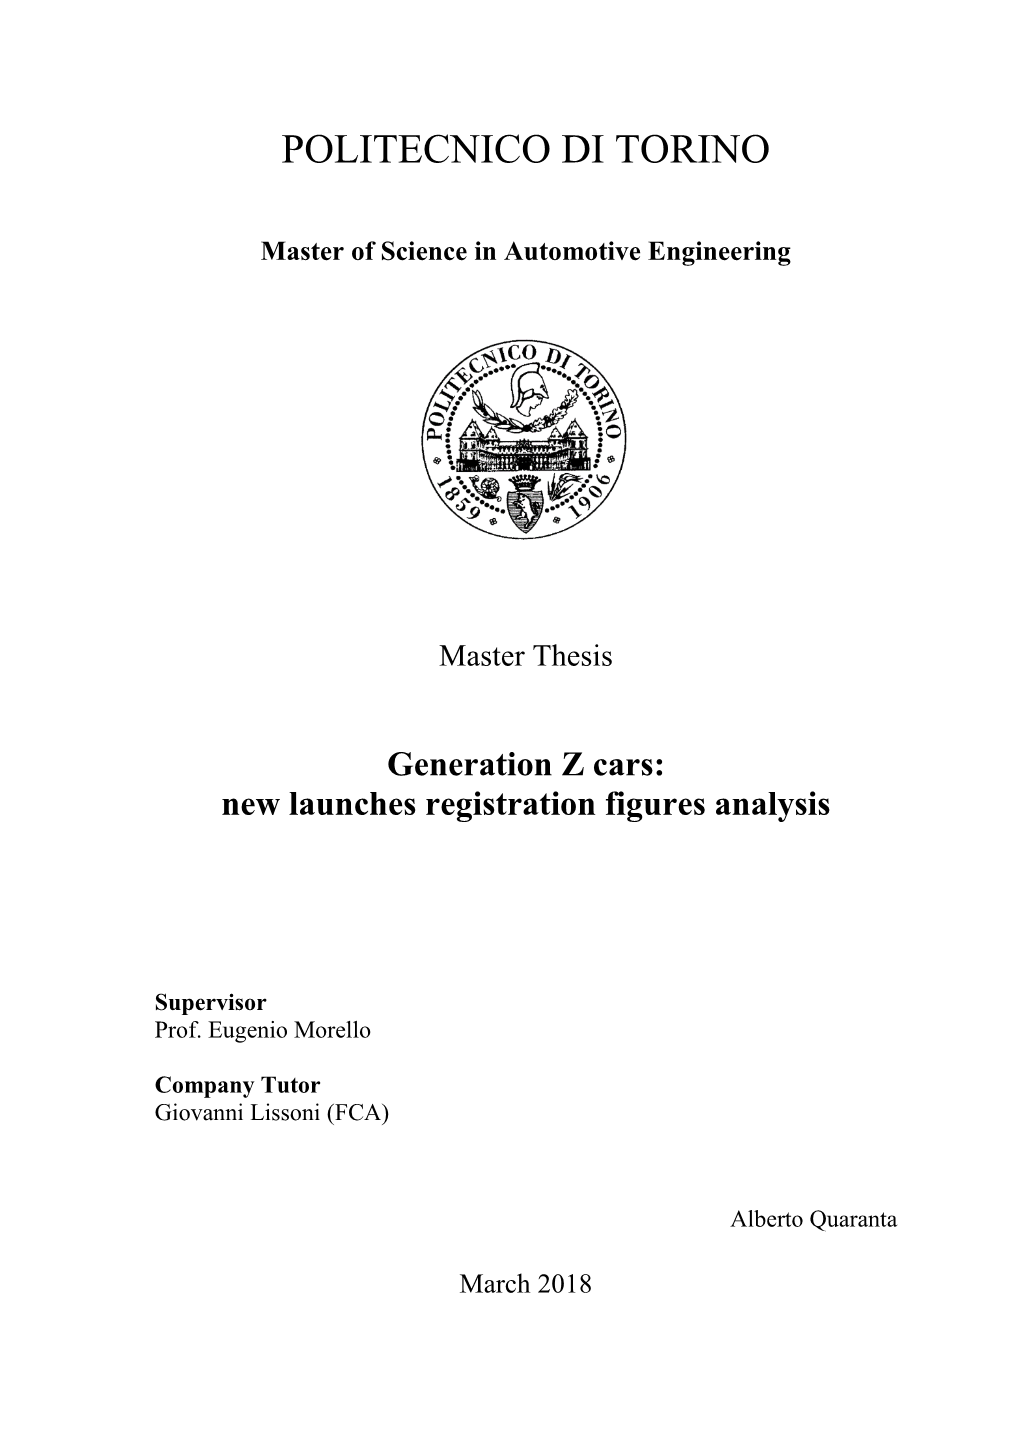 Master of Science in Automotive Engineering